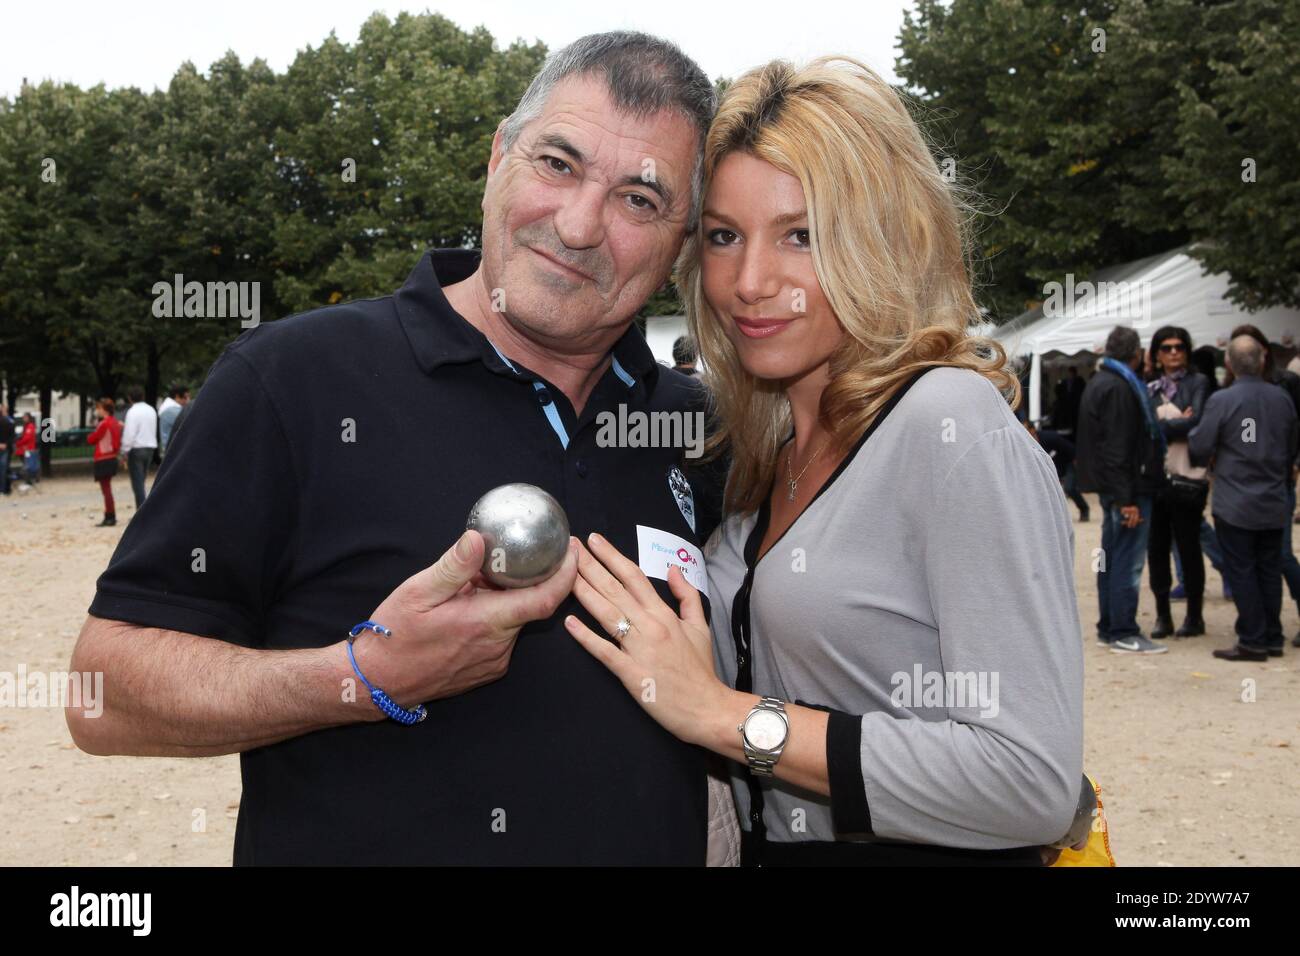 Jean-Marie Bigard attending The Petanque Tournament to benefit the  association 'Meghanora' held at Place des Invalides in Paris, France, on  September 29, 2013. Photo by Audrey Poree/ABACAPRESS.COM Stock Photo - Alamy